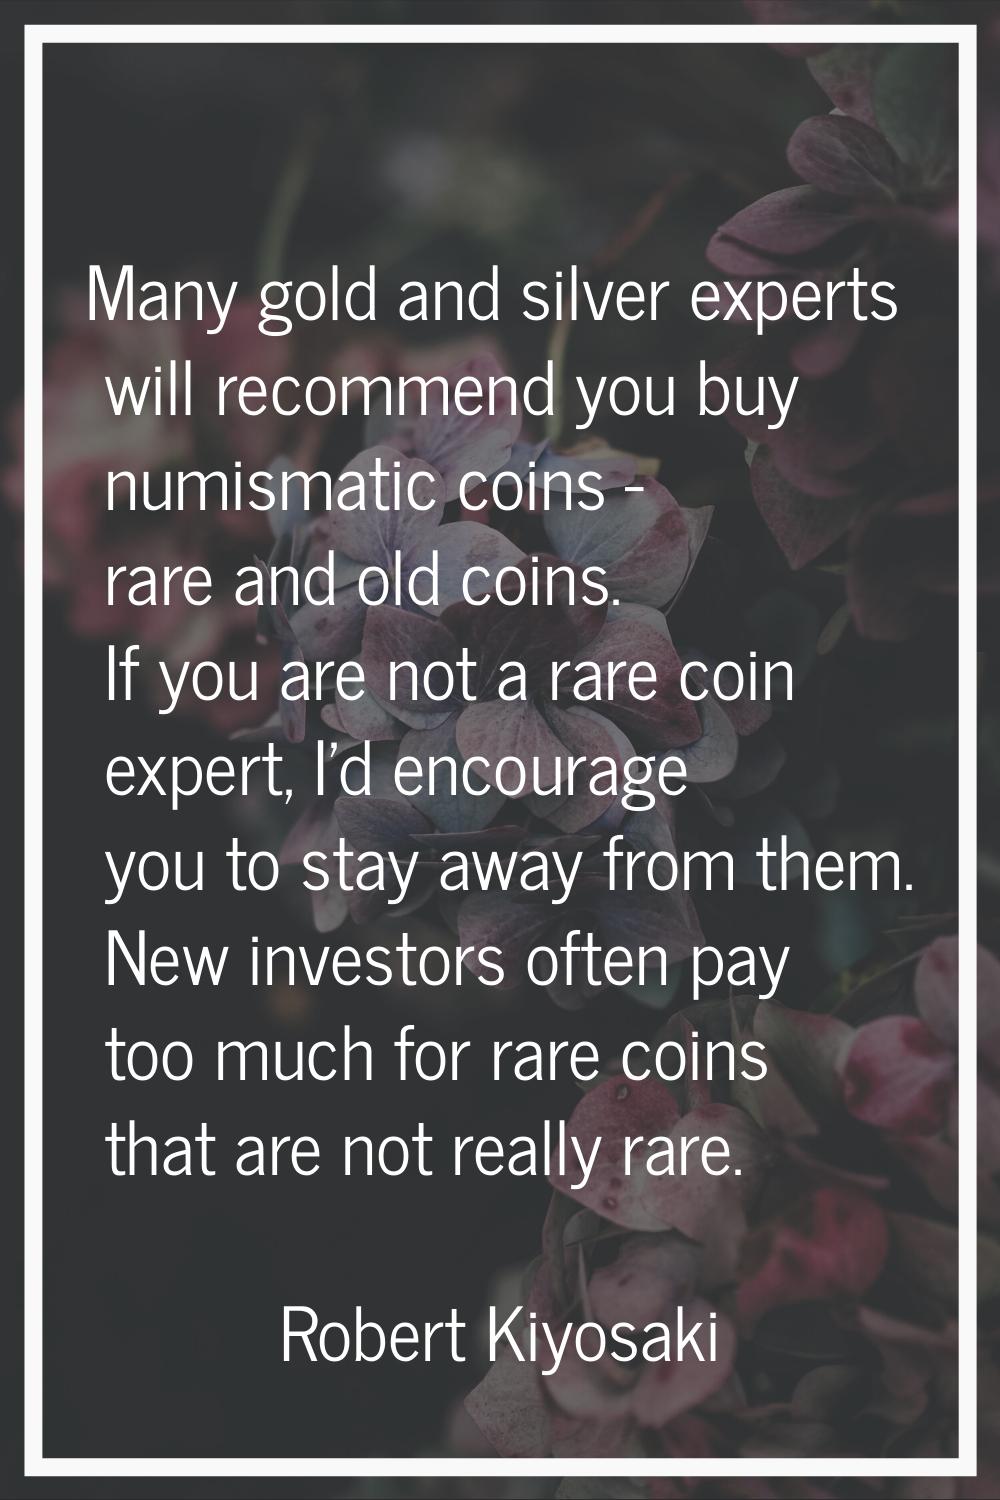 Many gold and silver experts will recommend you buy numismatic coins - rare and old coins. If you a